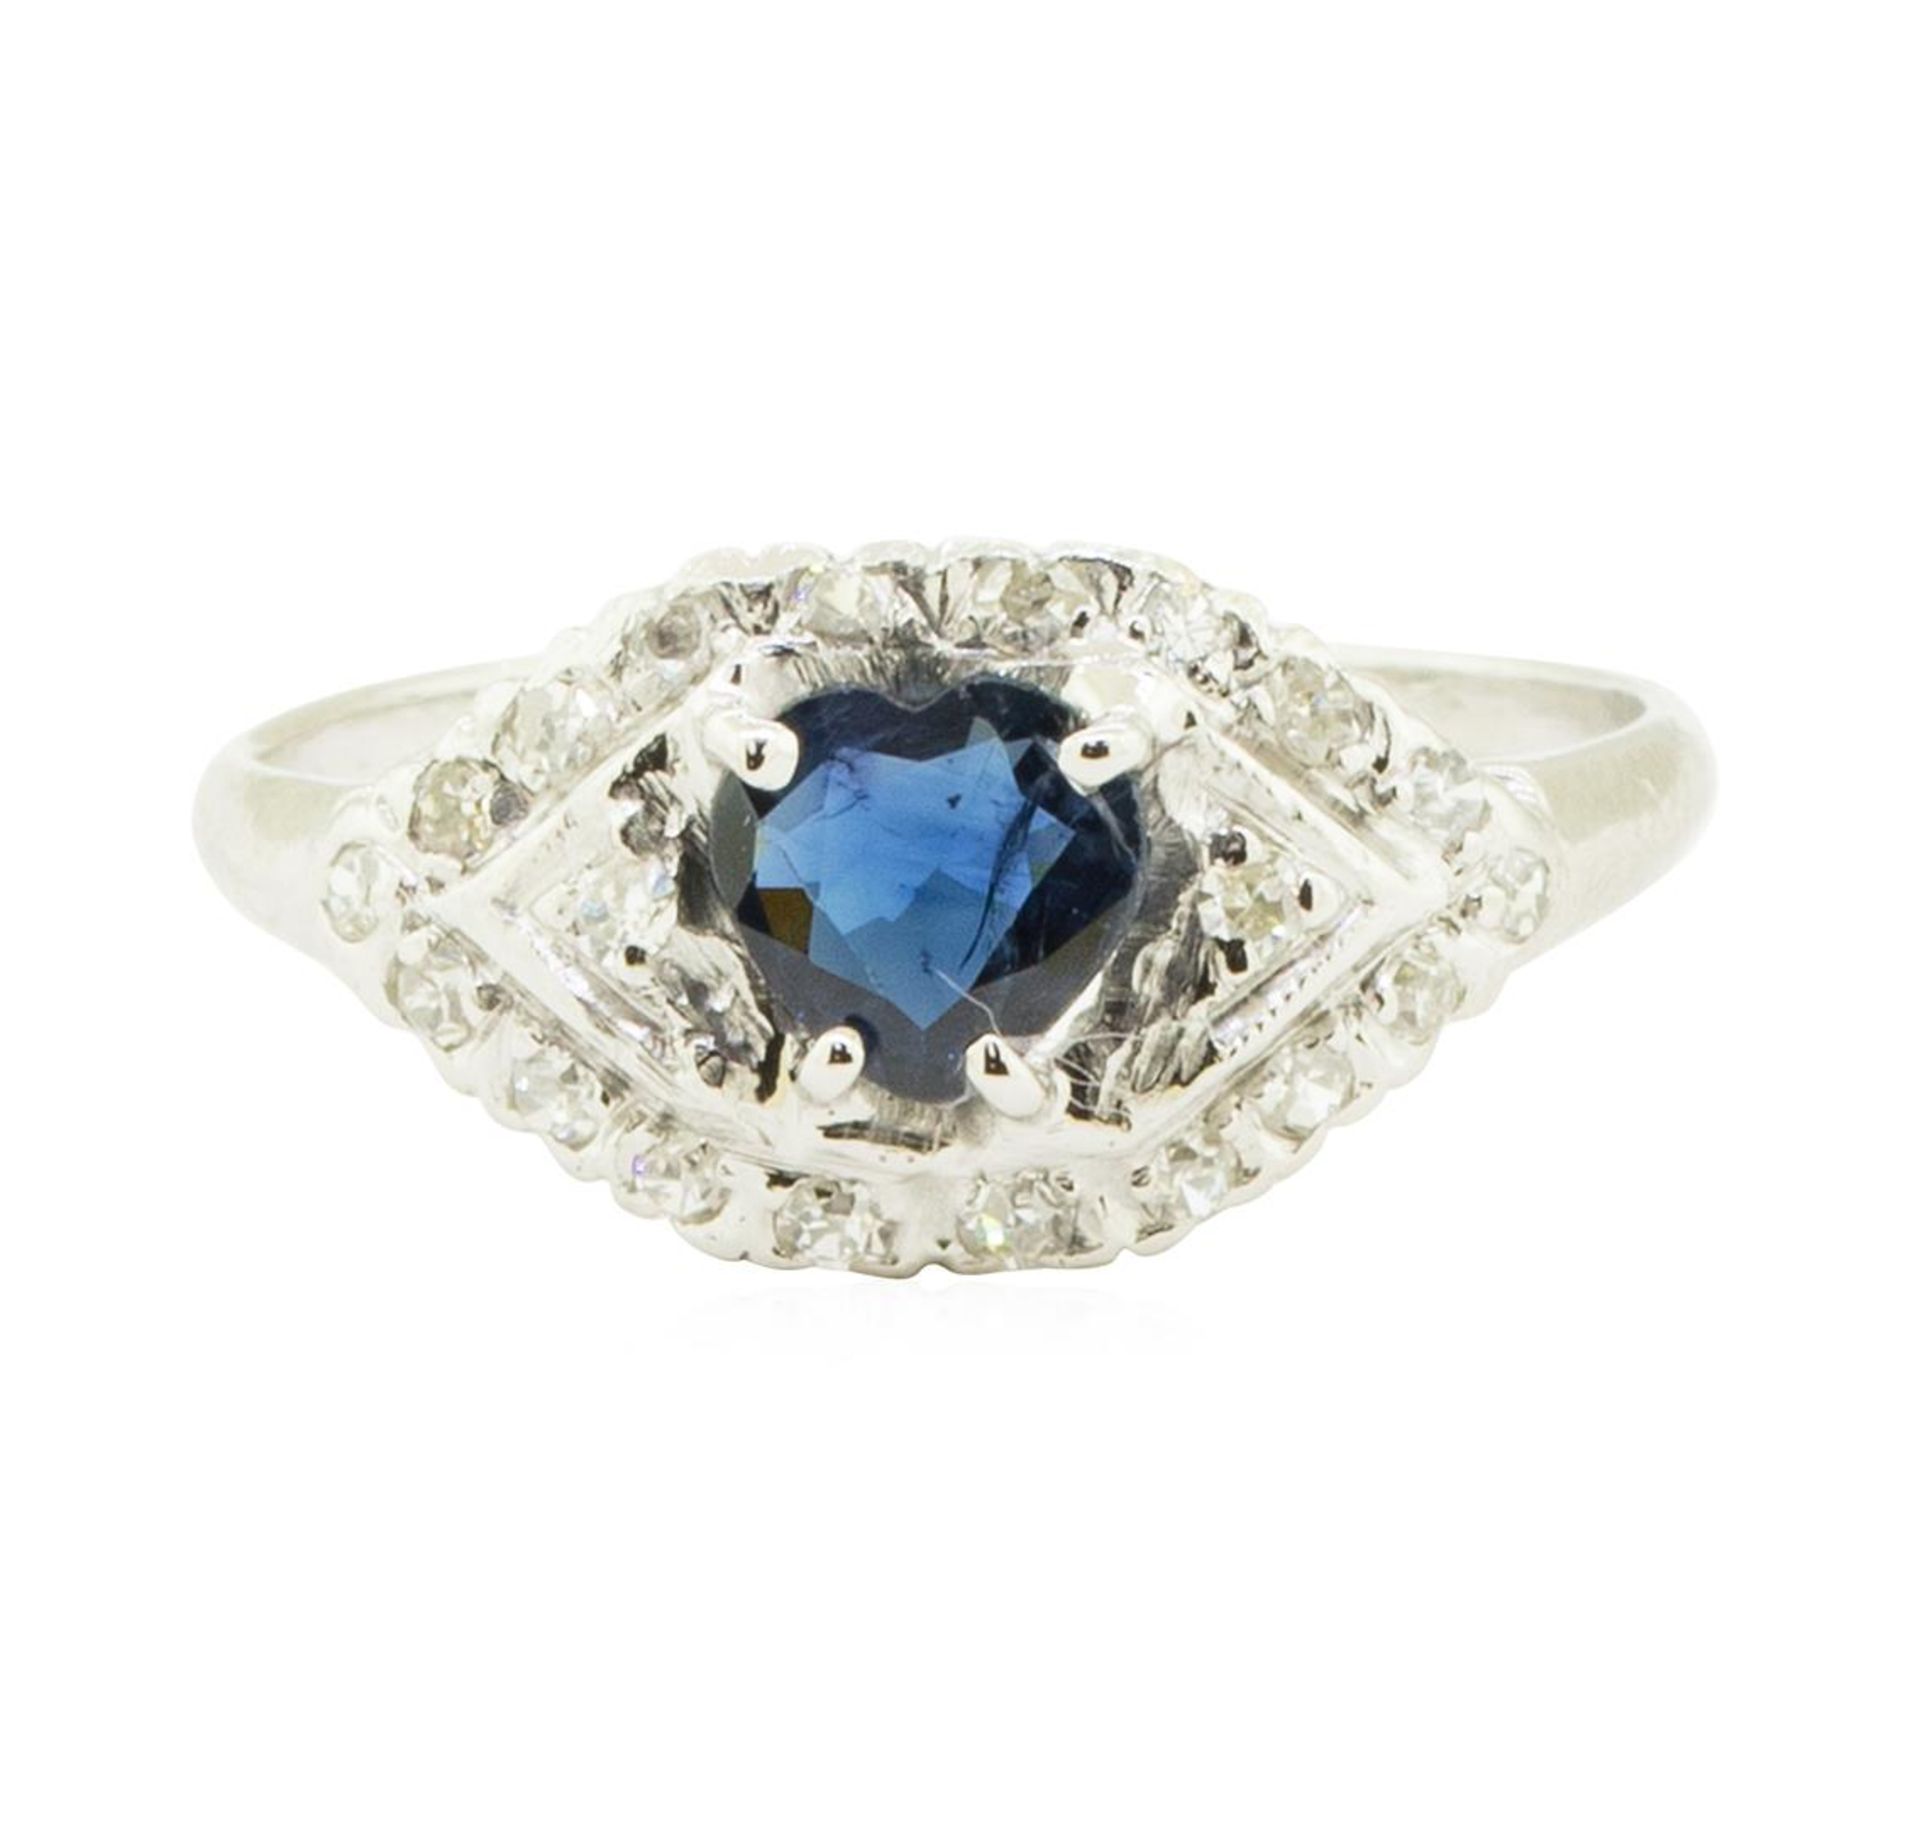 0.40 ctw Diamond and Sapphire Ring - 14KT White Gold - Image 2 of 4